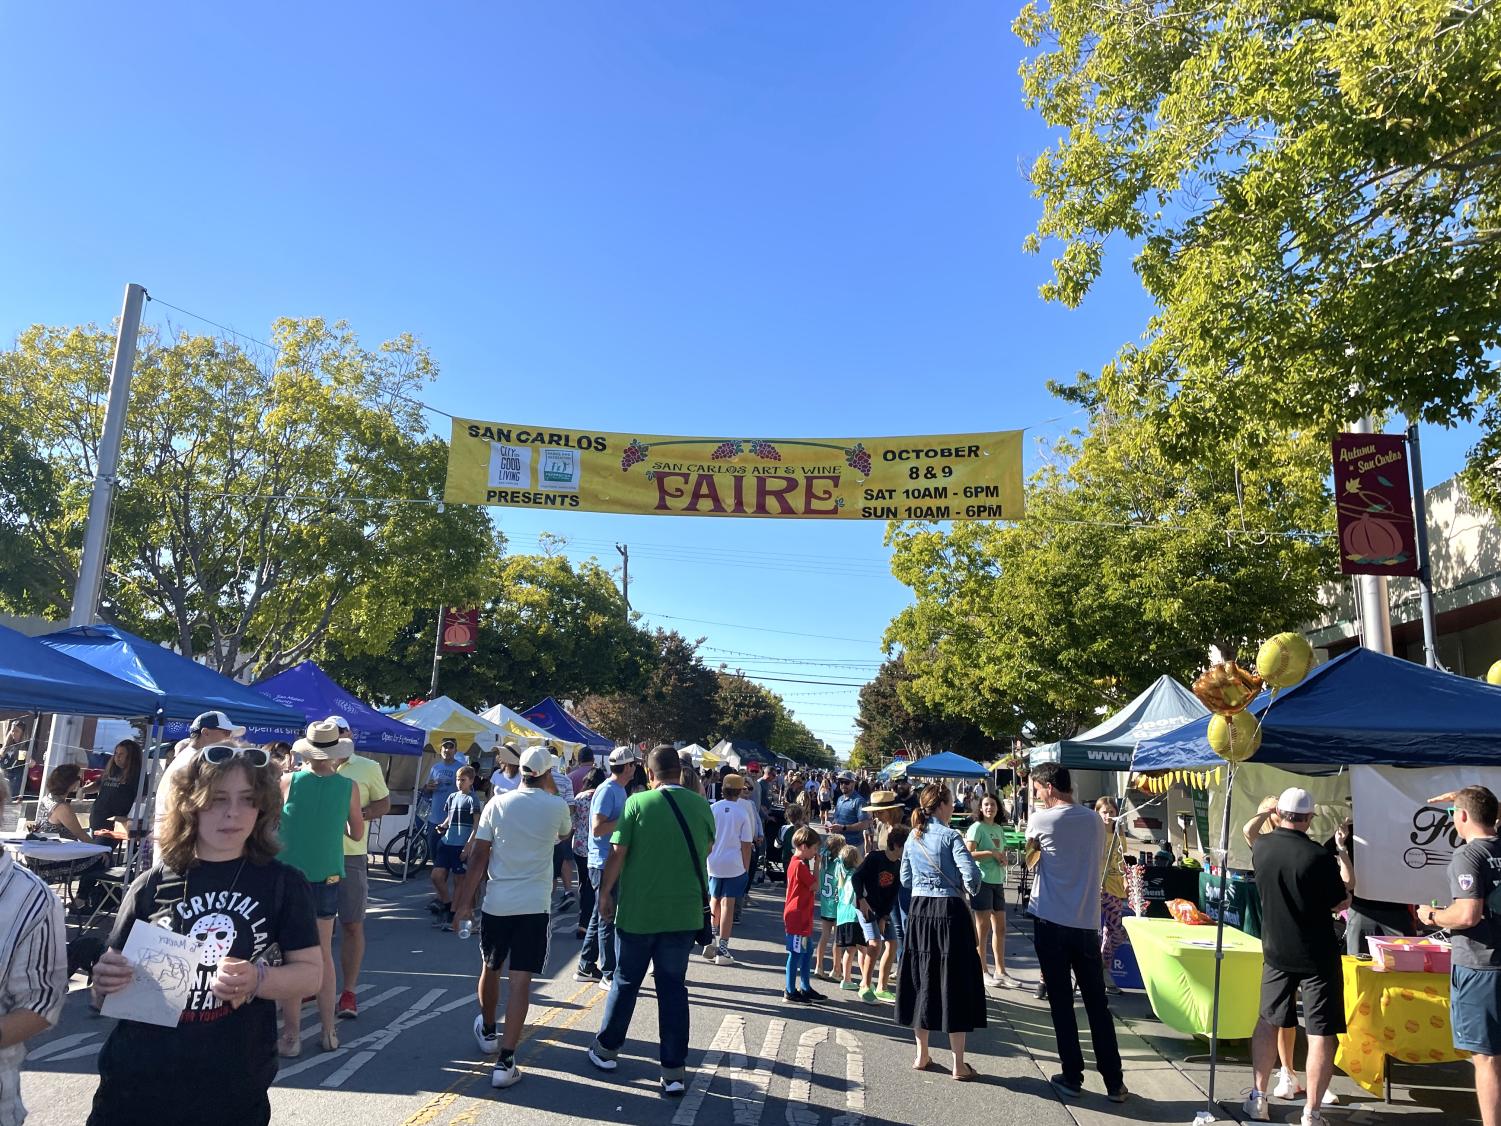 Putting ‘unity’ in San Carlos Art and Wine Faire makes a